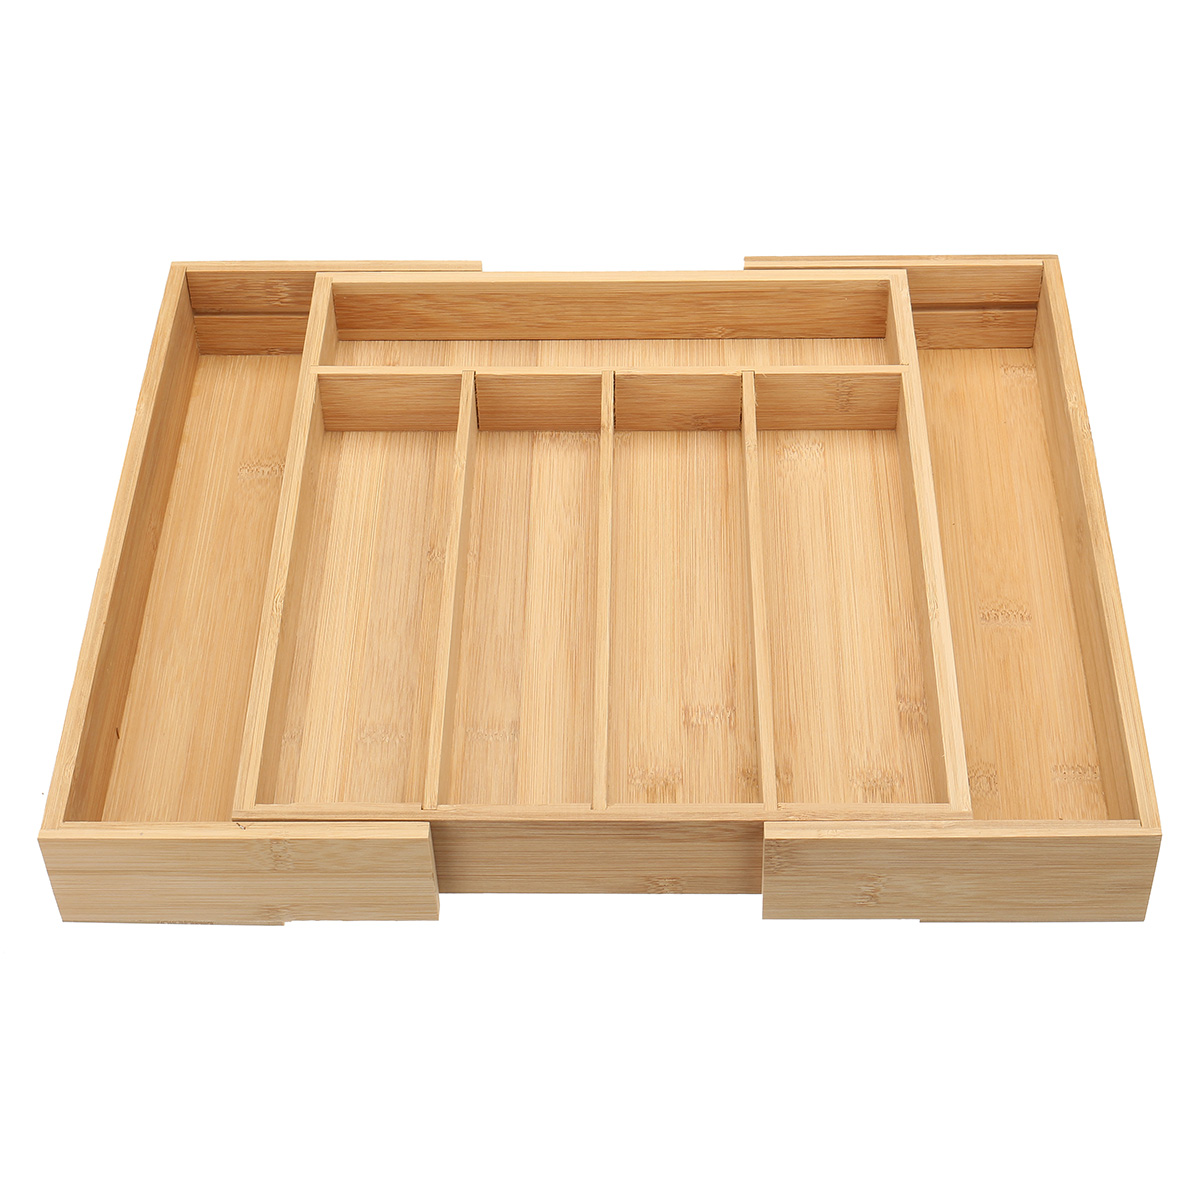 7-Cells-Wooden-Cutlery-Drawer-Draw-Organiser-Bamboo-Expandable-Tray-1753783-5